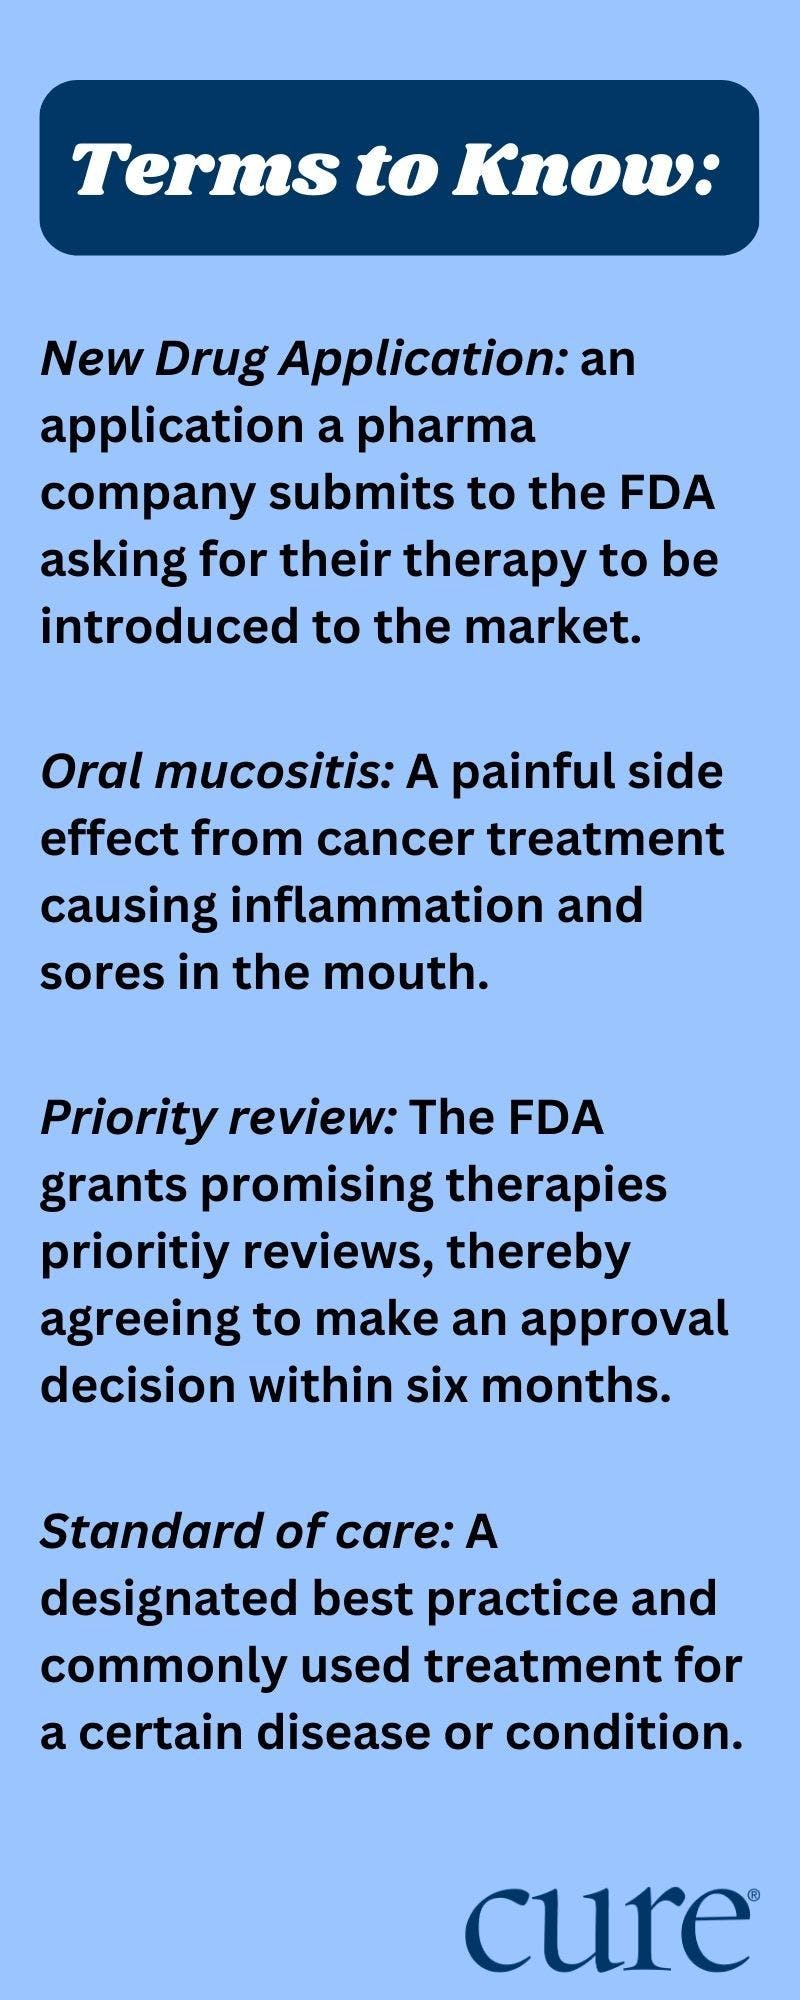 definition of oral mucositis, new drug application, priority review and standard of care